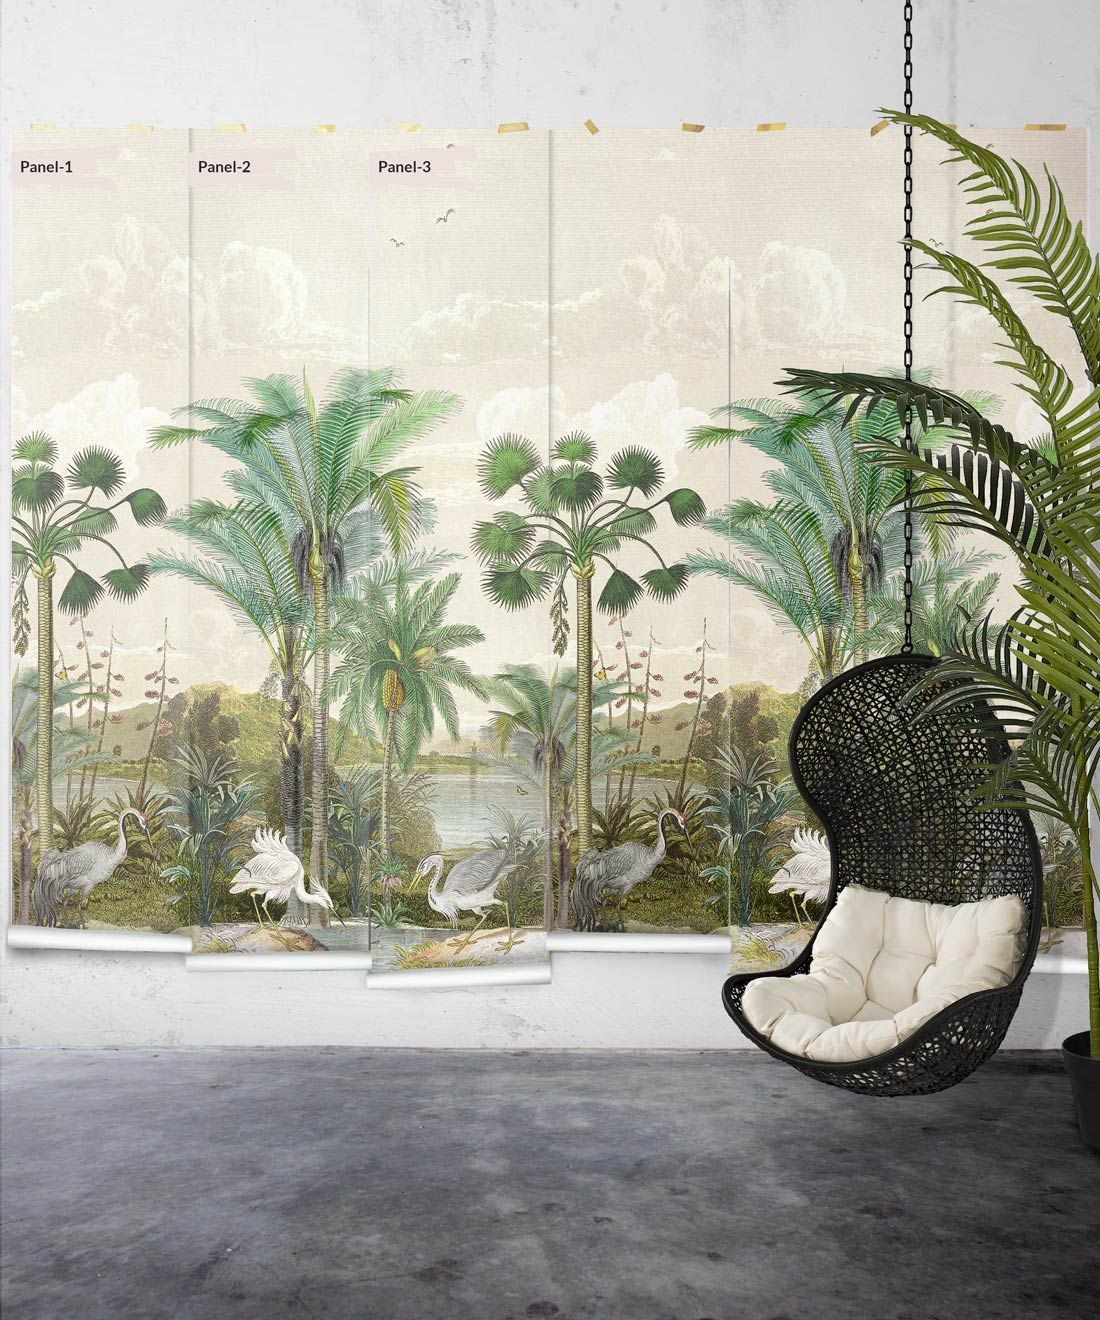 South Asian Subcontinent Wallpaper Mural •Bethany Linz • Palm Tree Mural • Beige • Panels